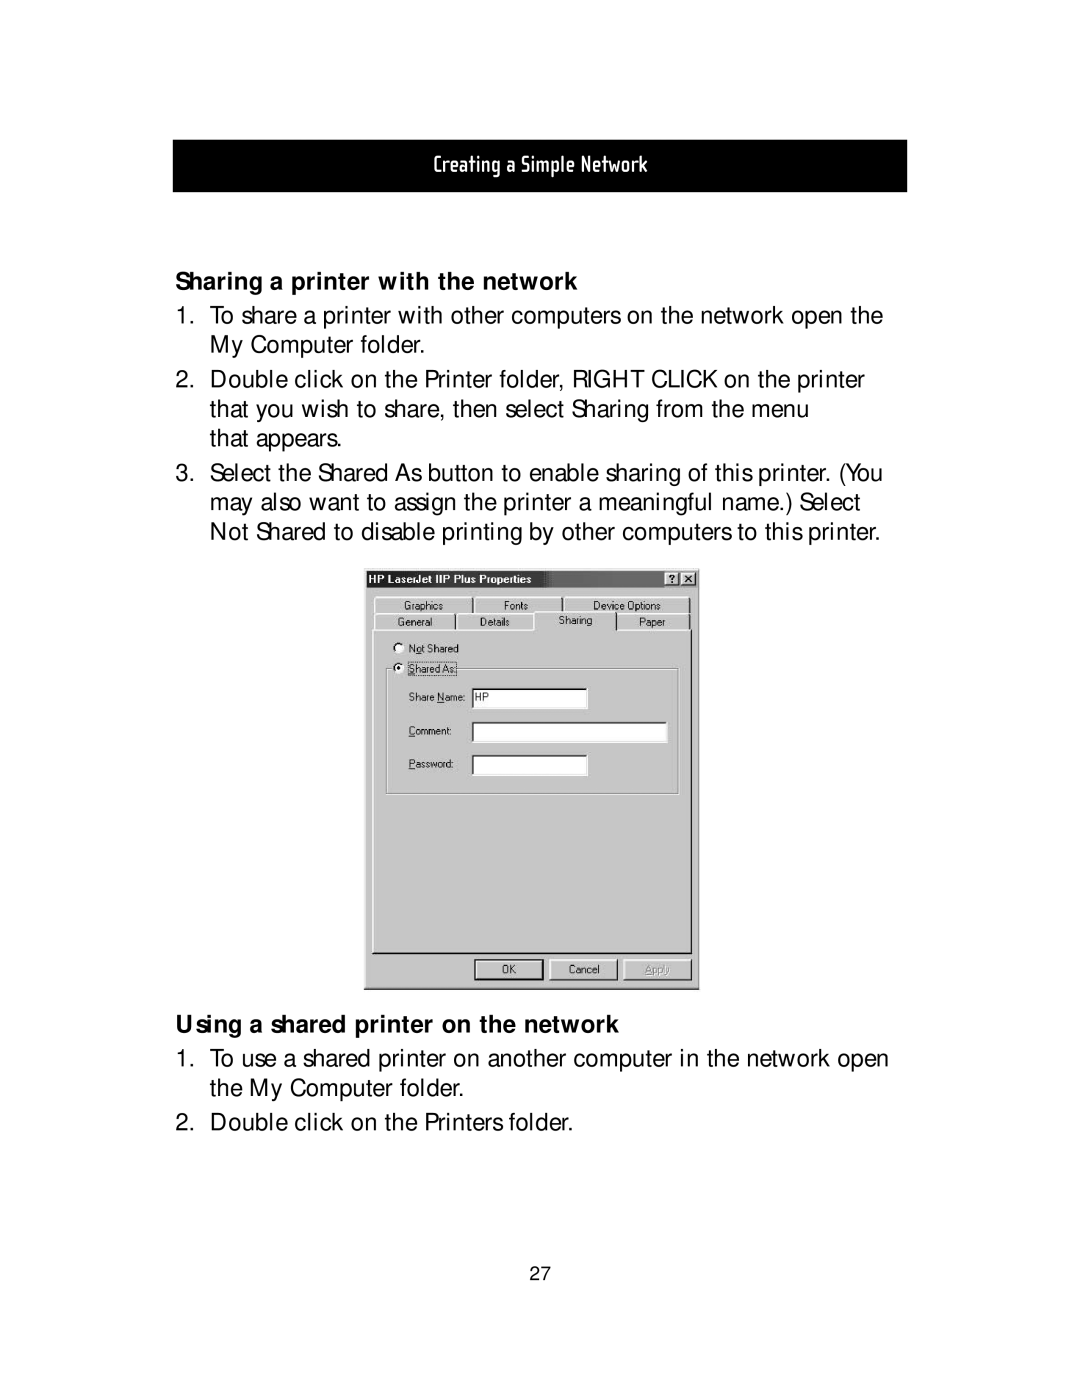 Belkin F5D5000t manual Sharing a printer with the network, Using a shared printer on the network, Creating a Simple Network 